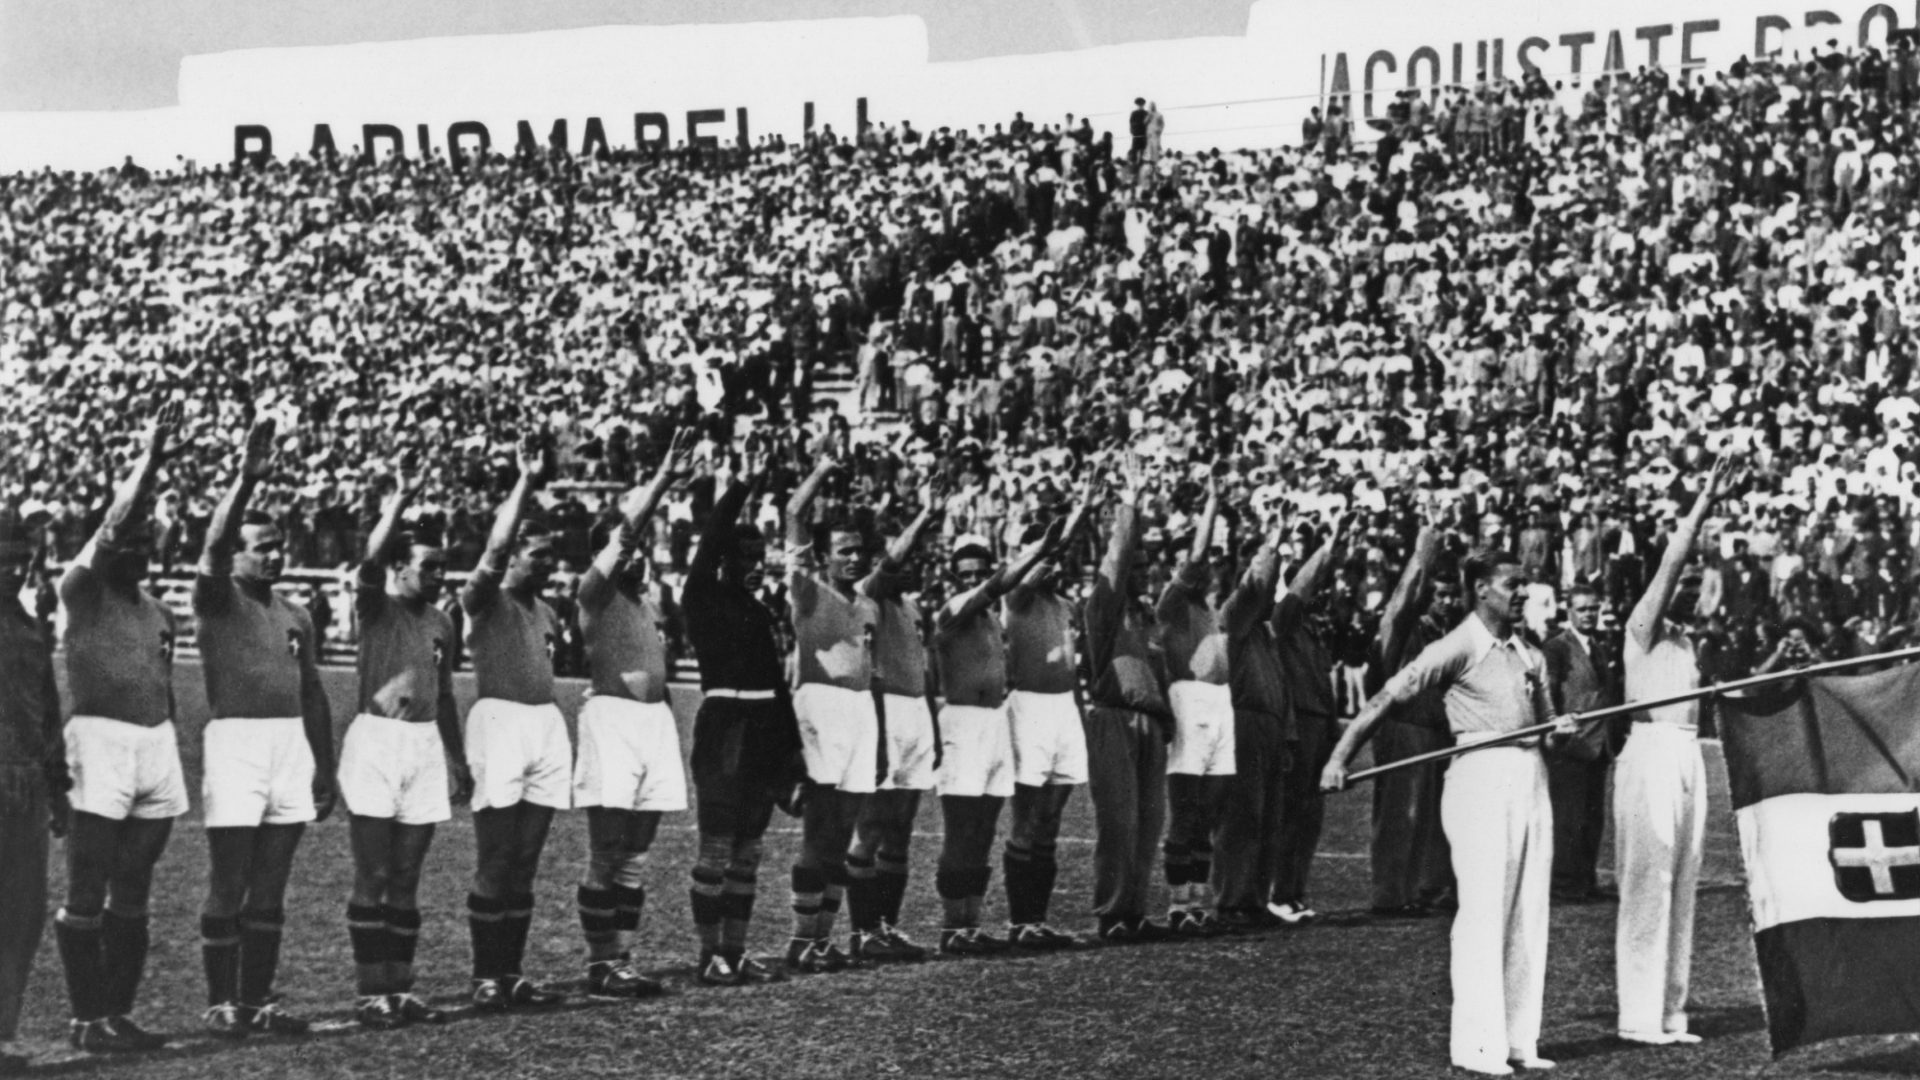 The Italian team performs a fascist salute before the 1934 World Cup Final in Rome. Photo: Keystone/Hulton Archive/Getty